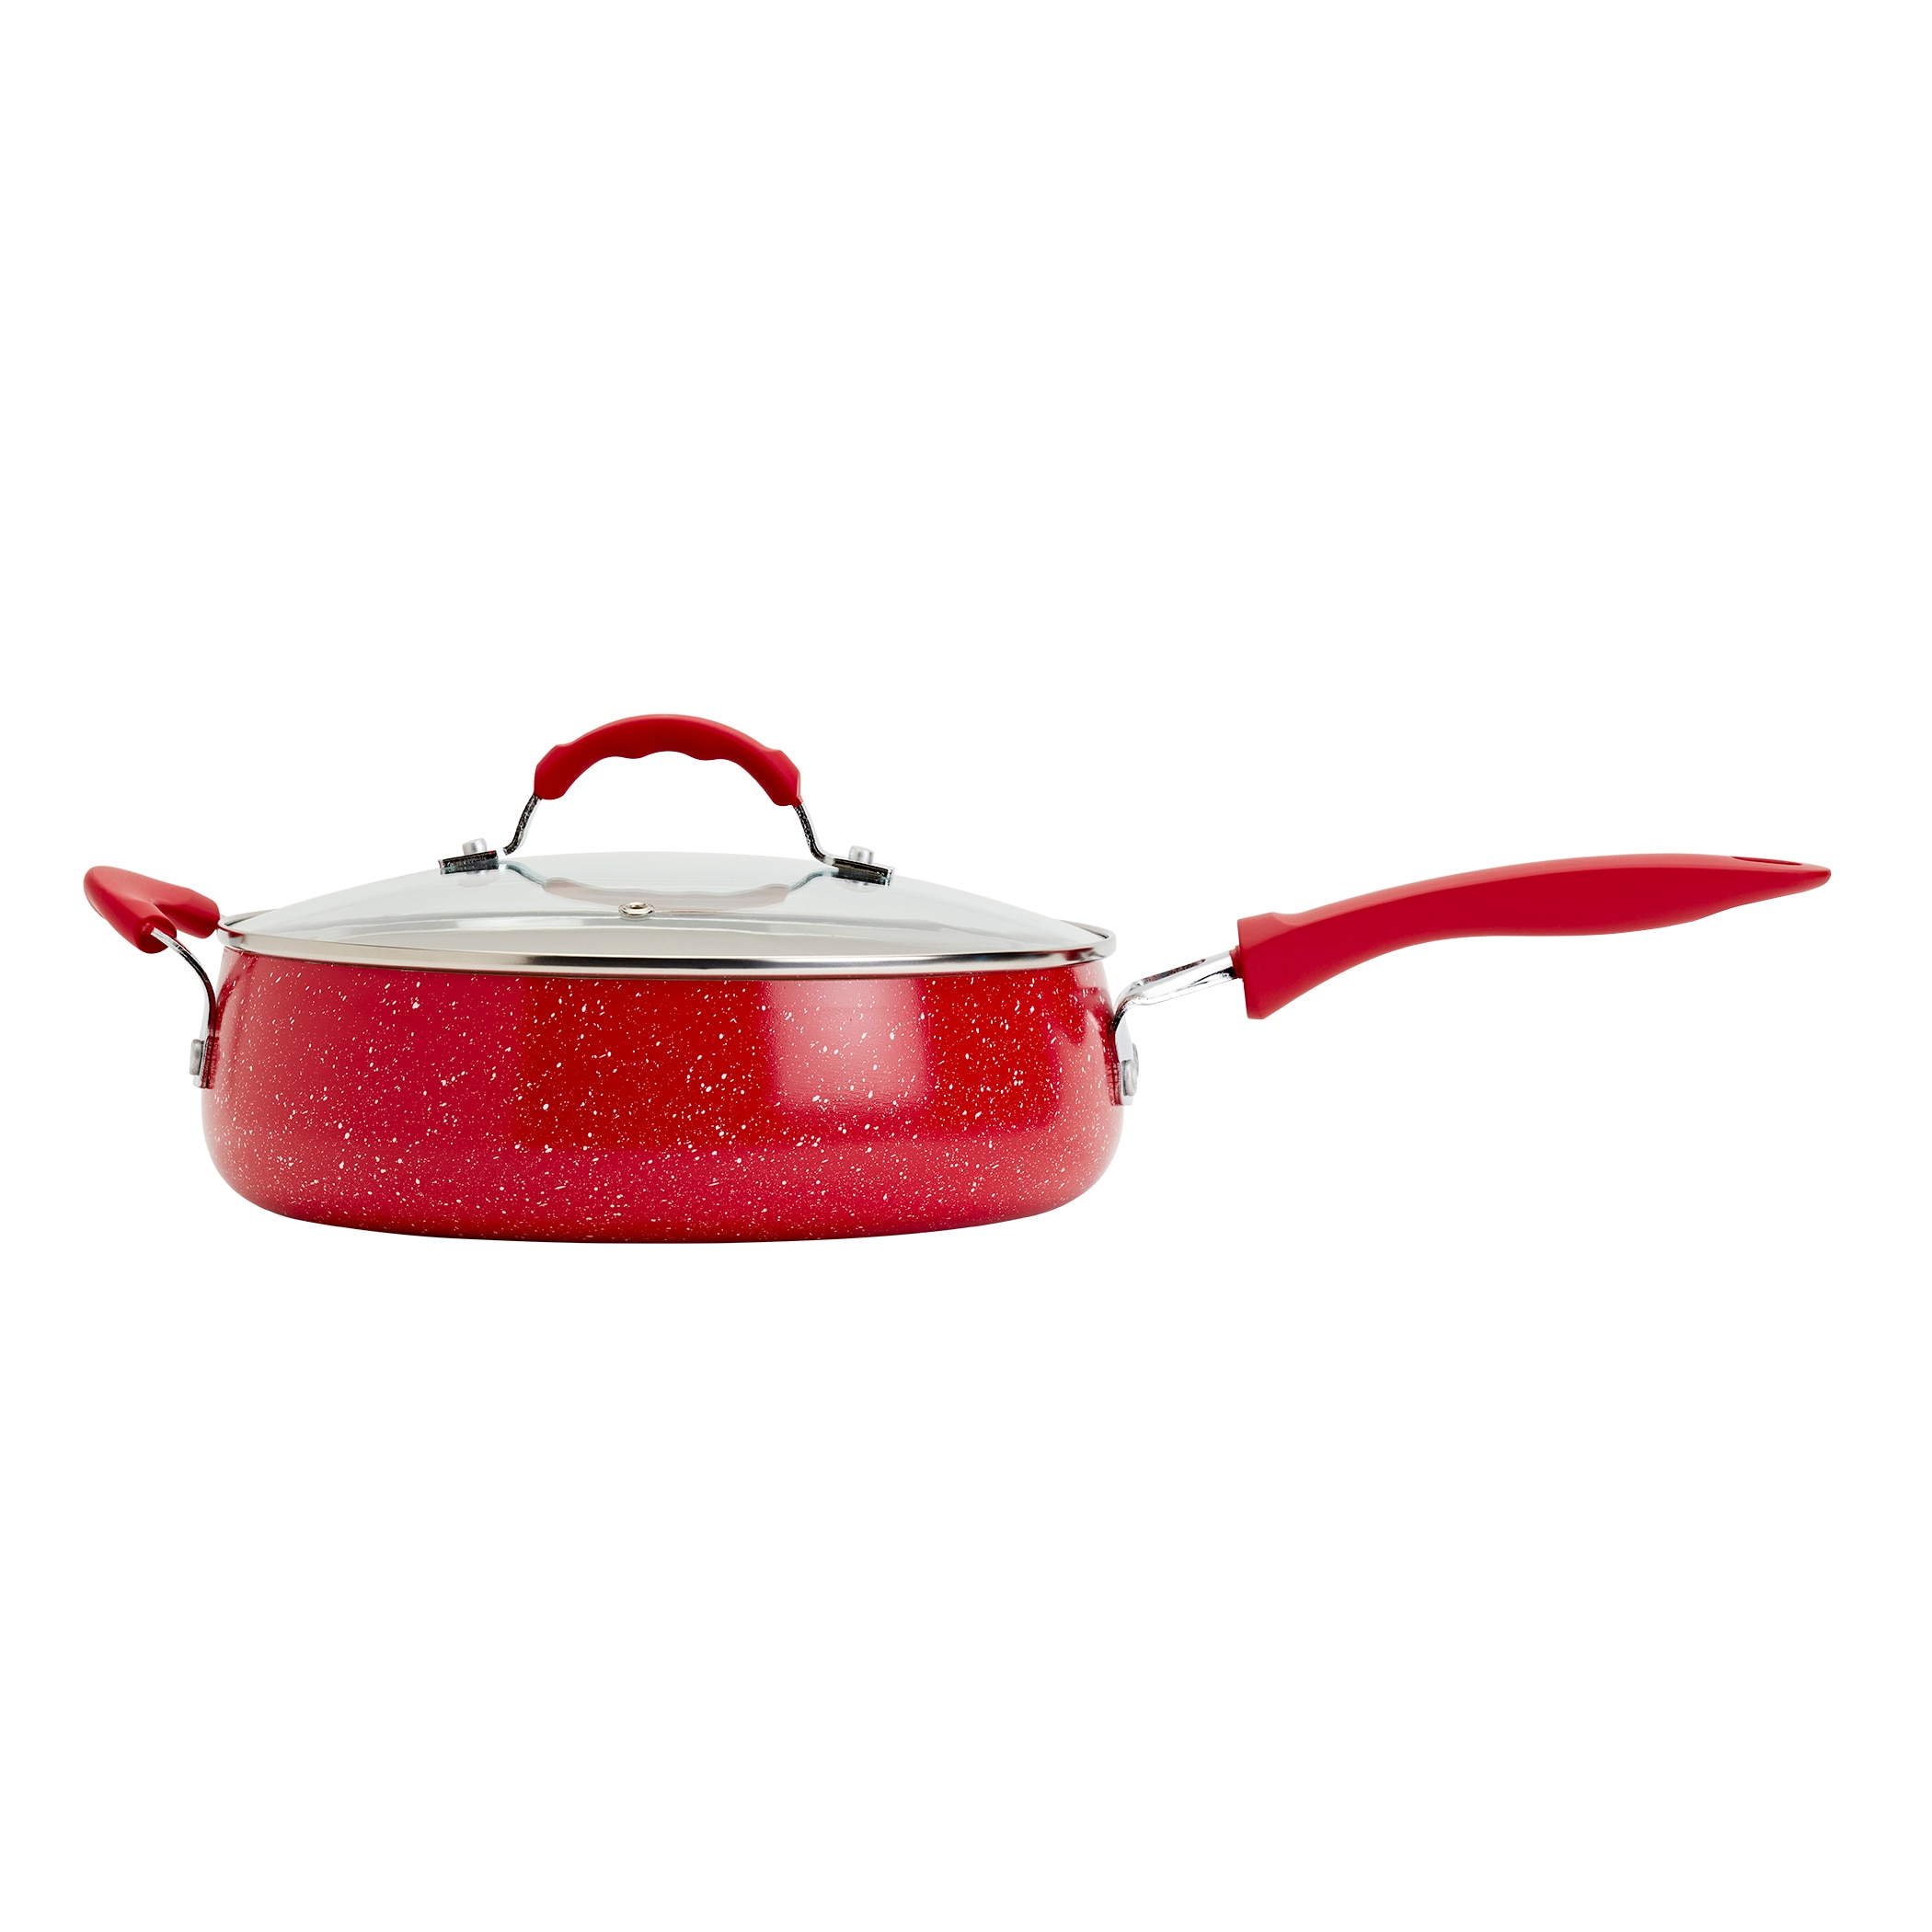 The Pioneer Woman 10 Nonstick Decorated Frying Pan with Soft